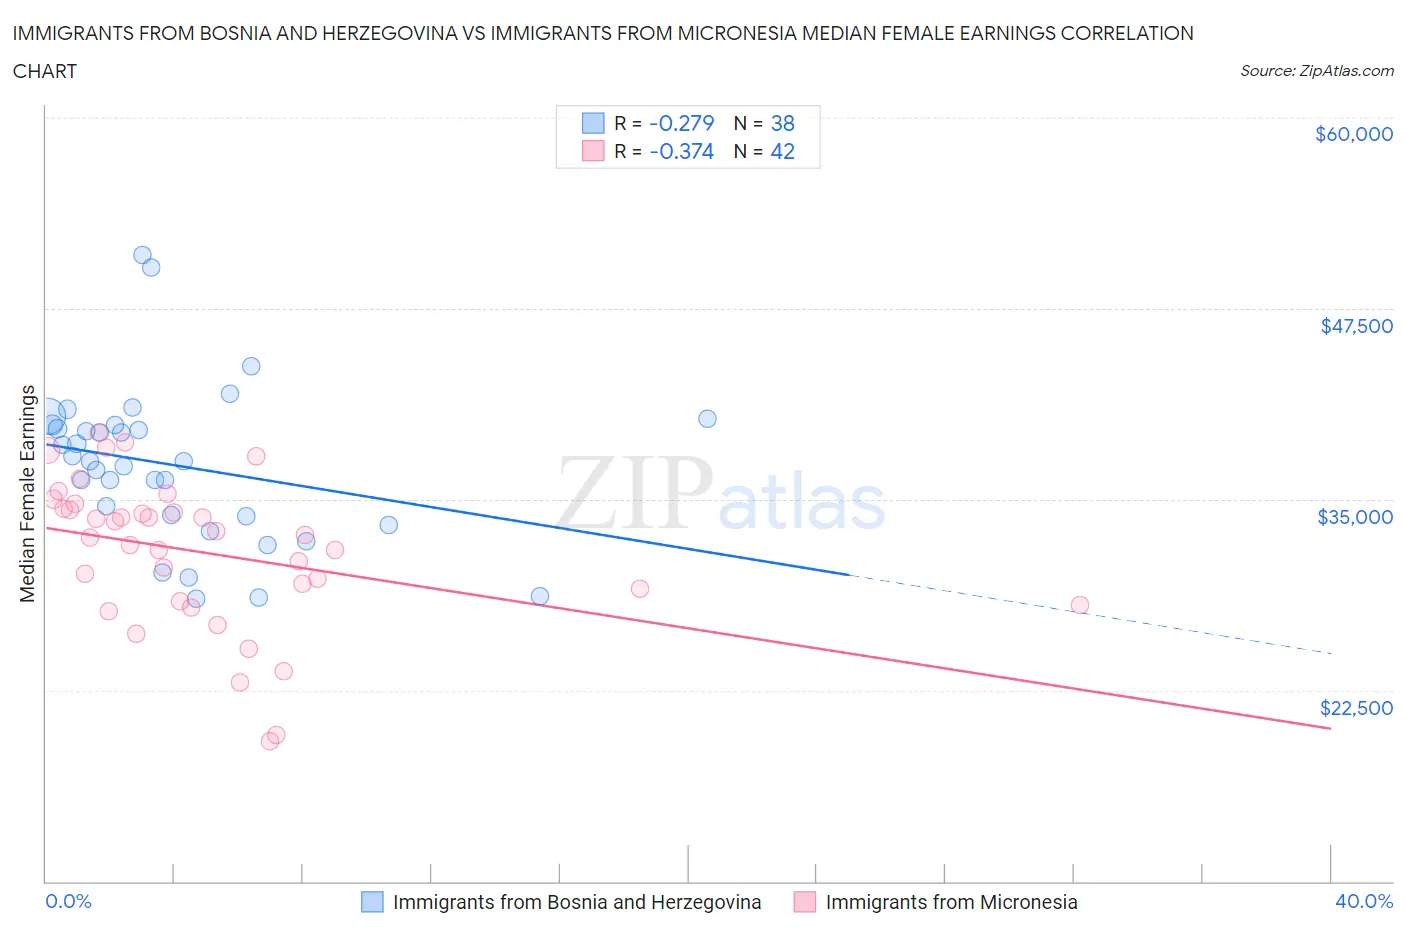 Immigrants from Bosnia and Herzegovina vs Immigrants from Micronesia Median Female Earnings